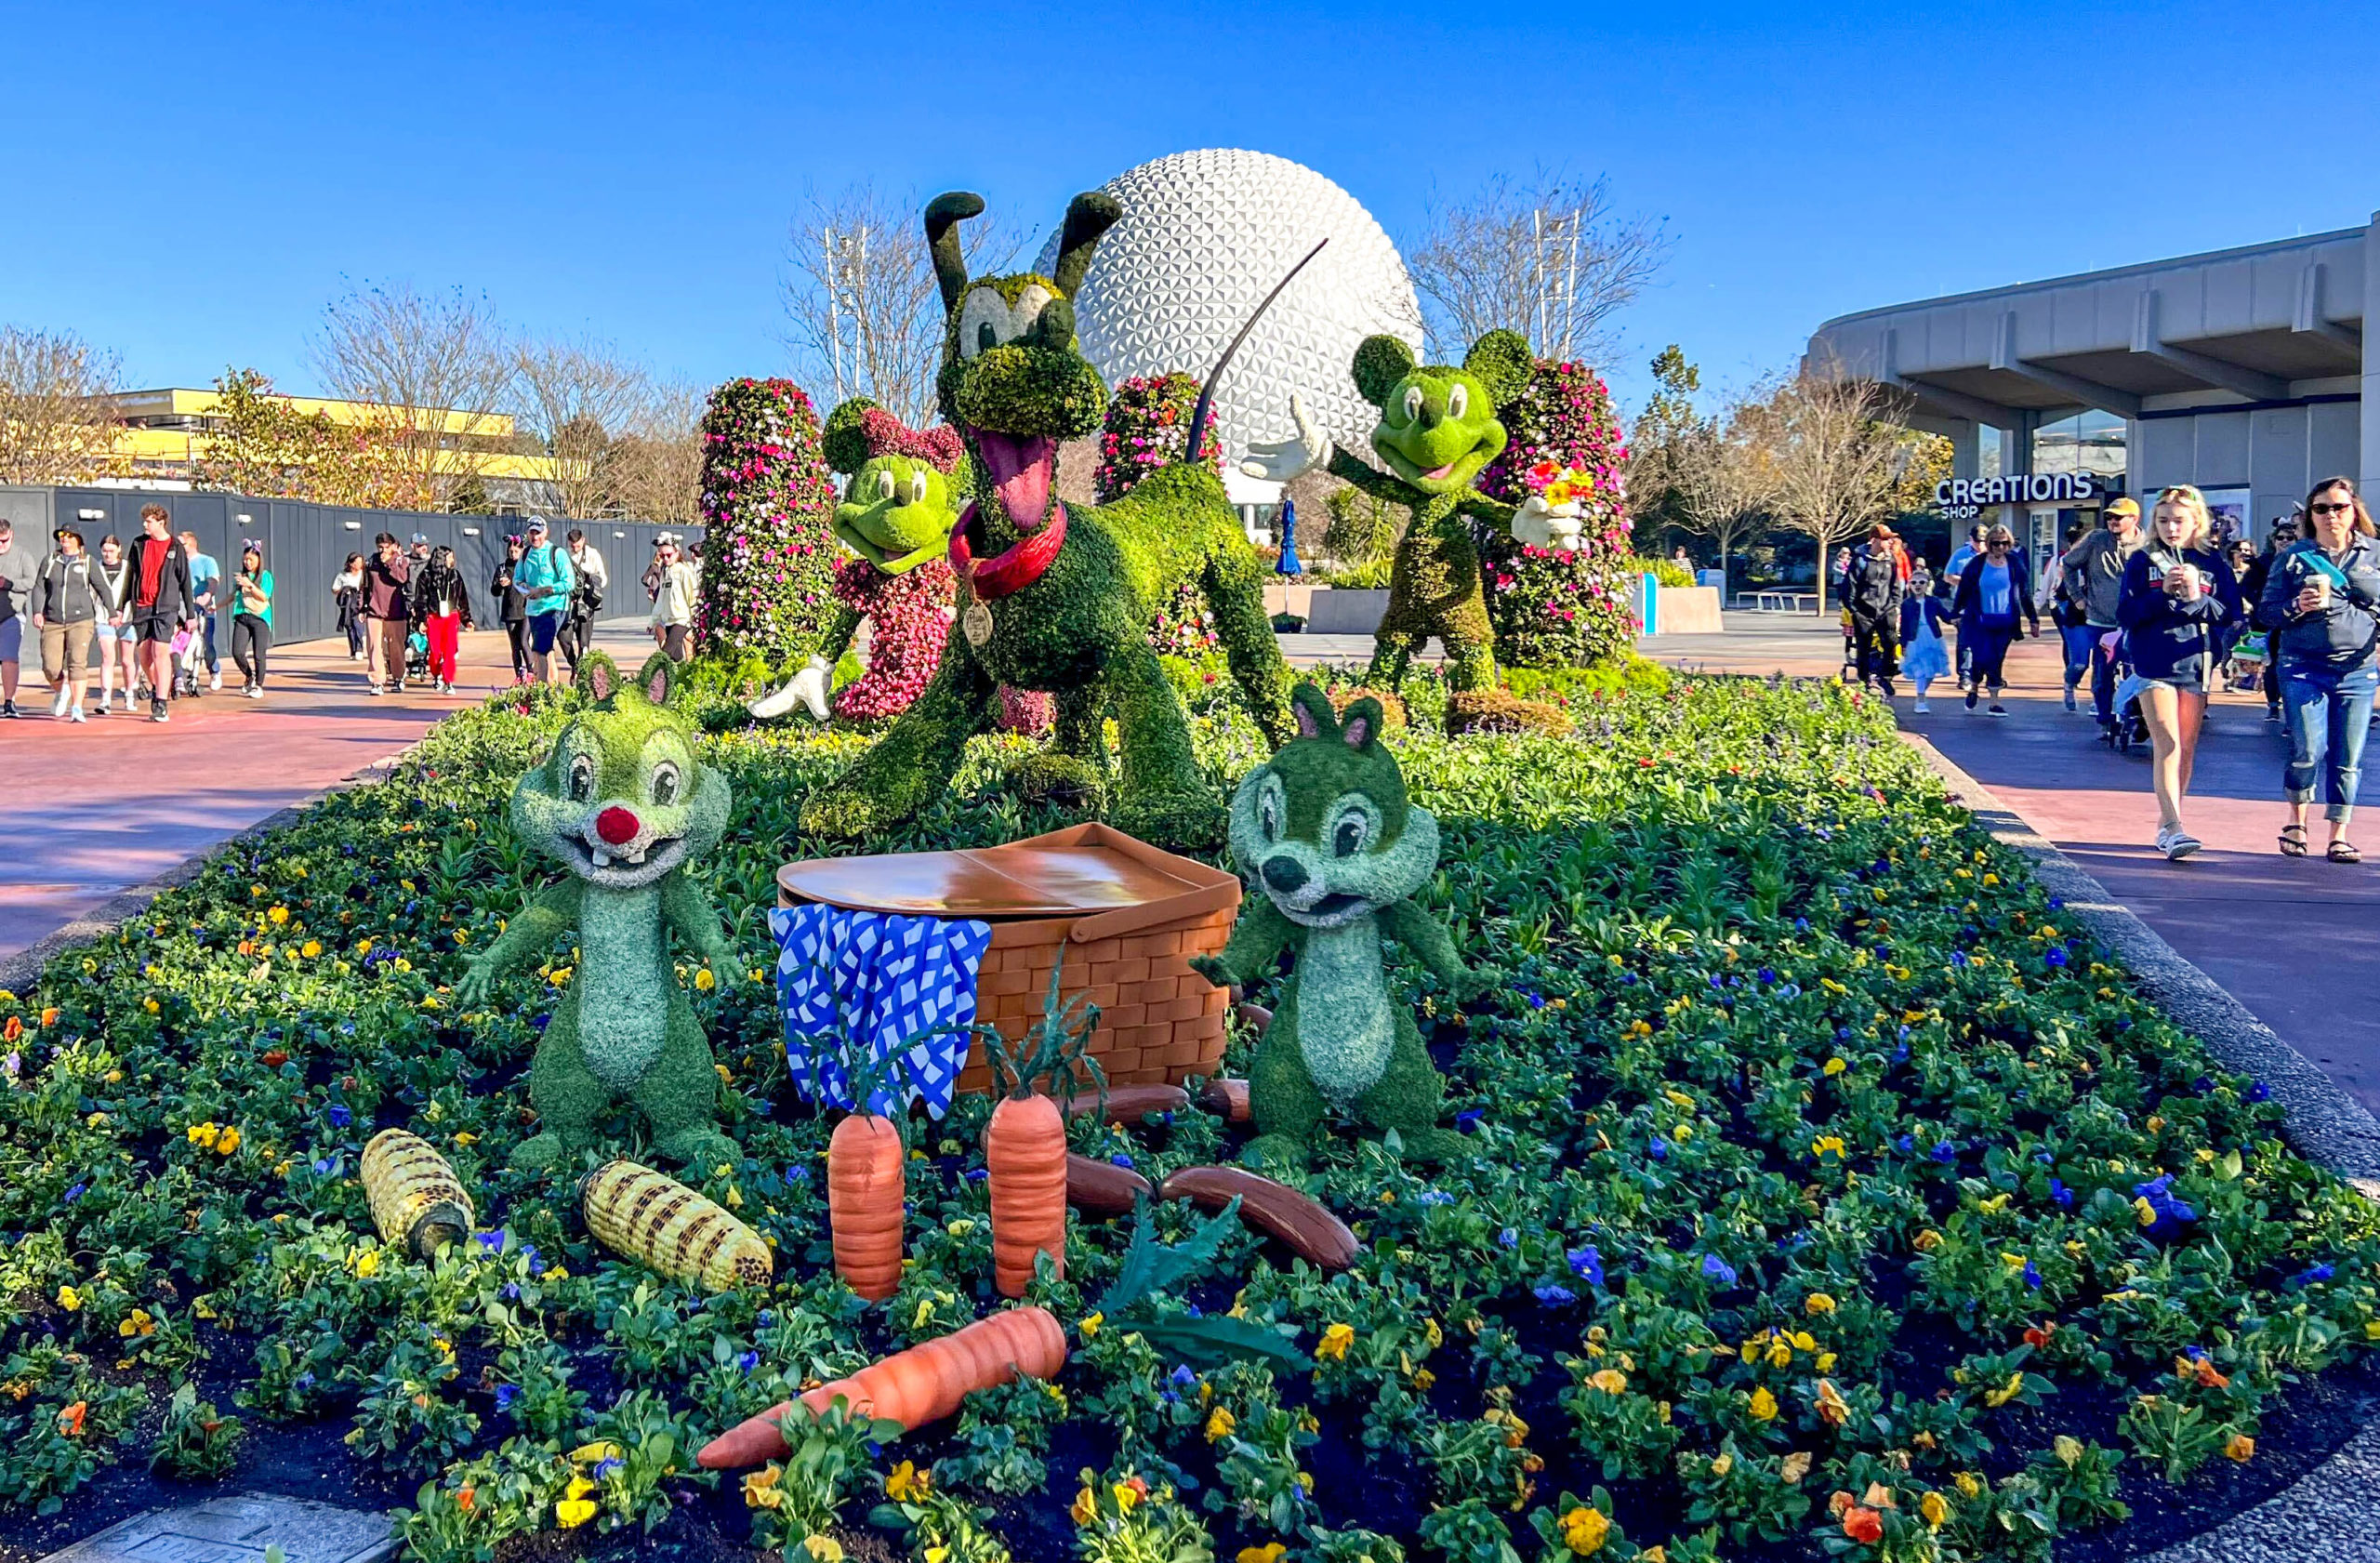 Pluto, Mickey, Minnie, Chip, and Dale topiaries